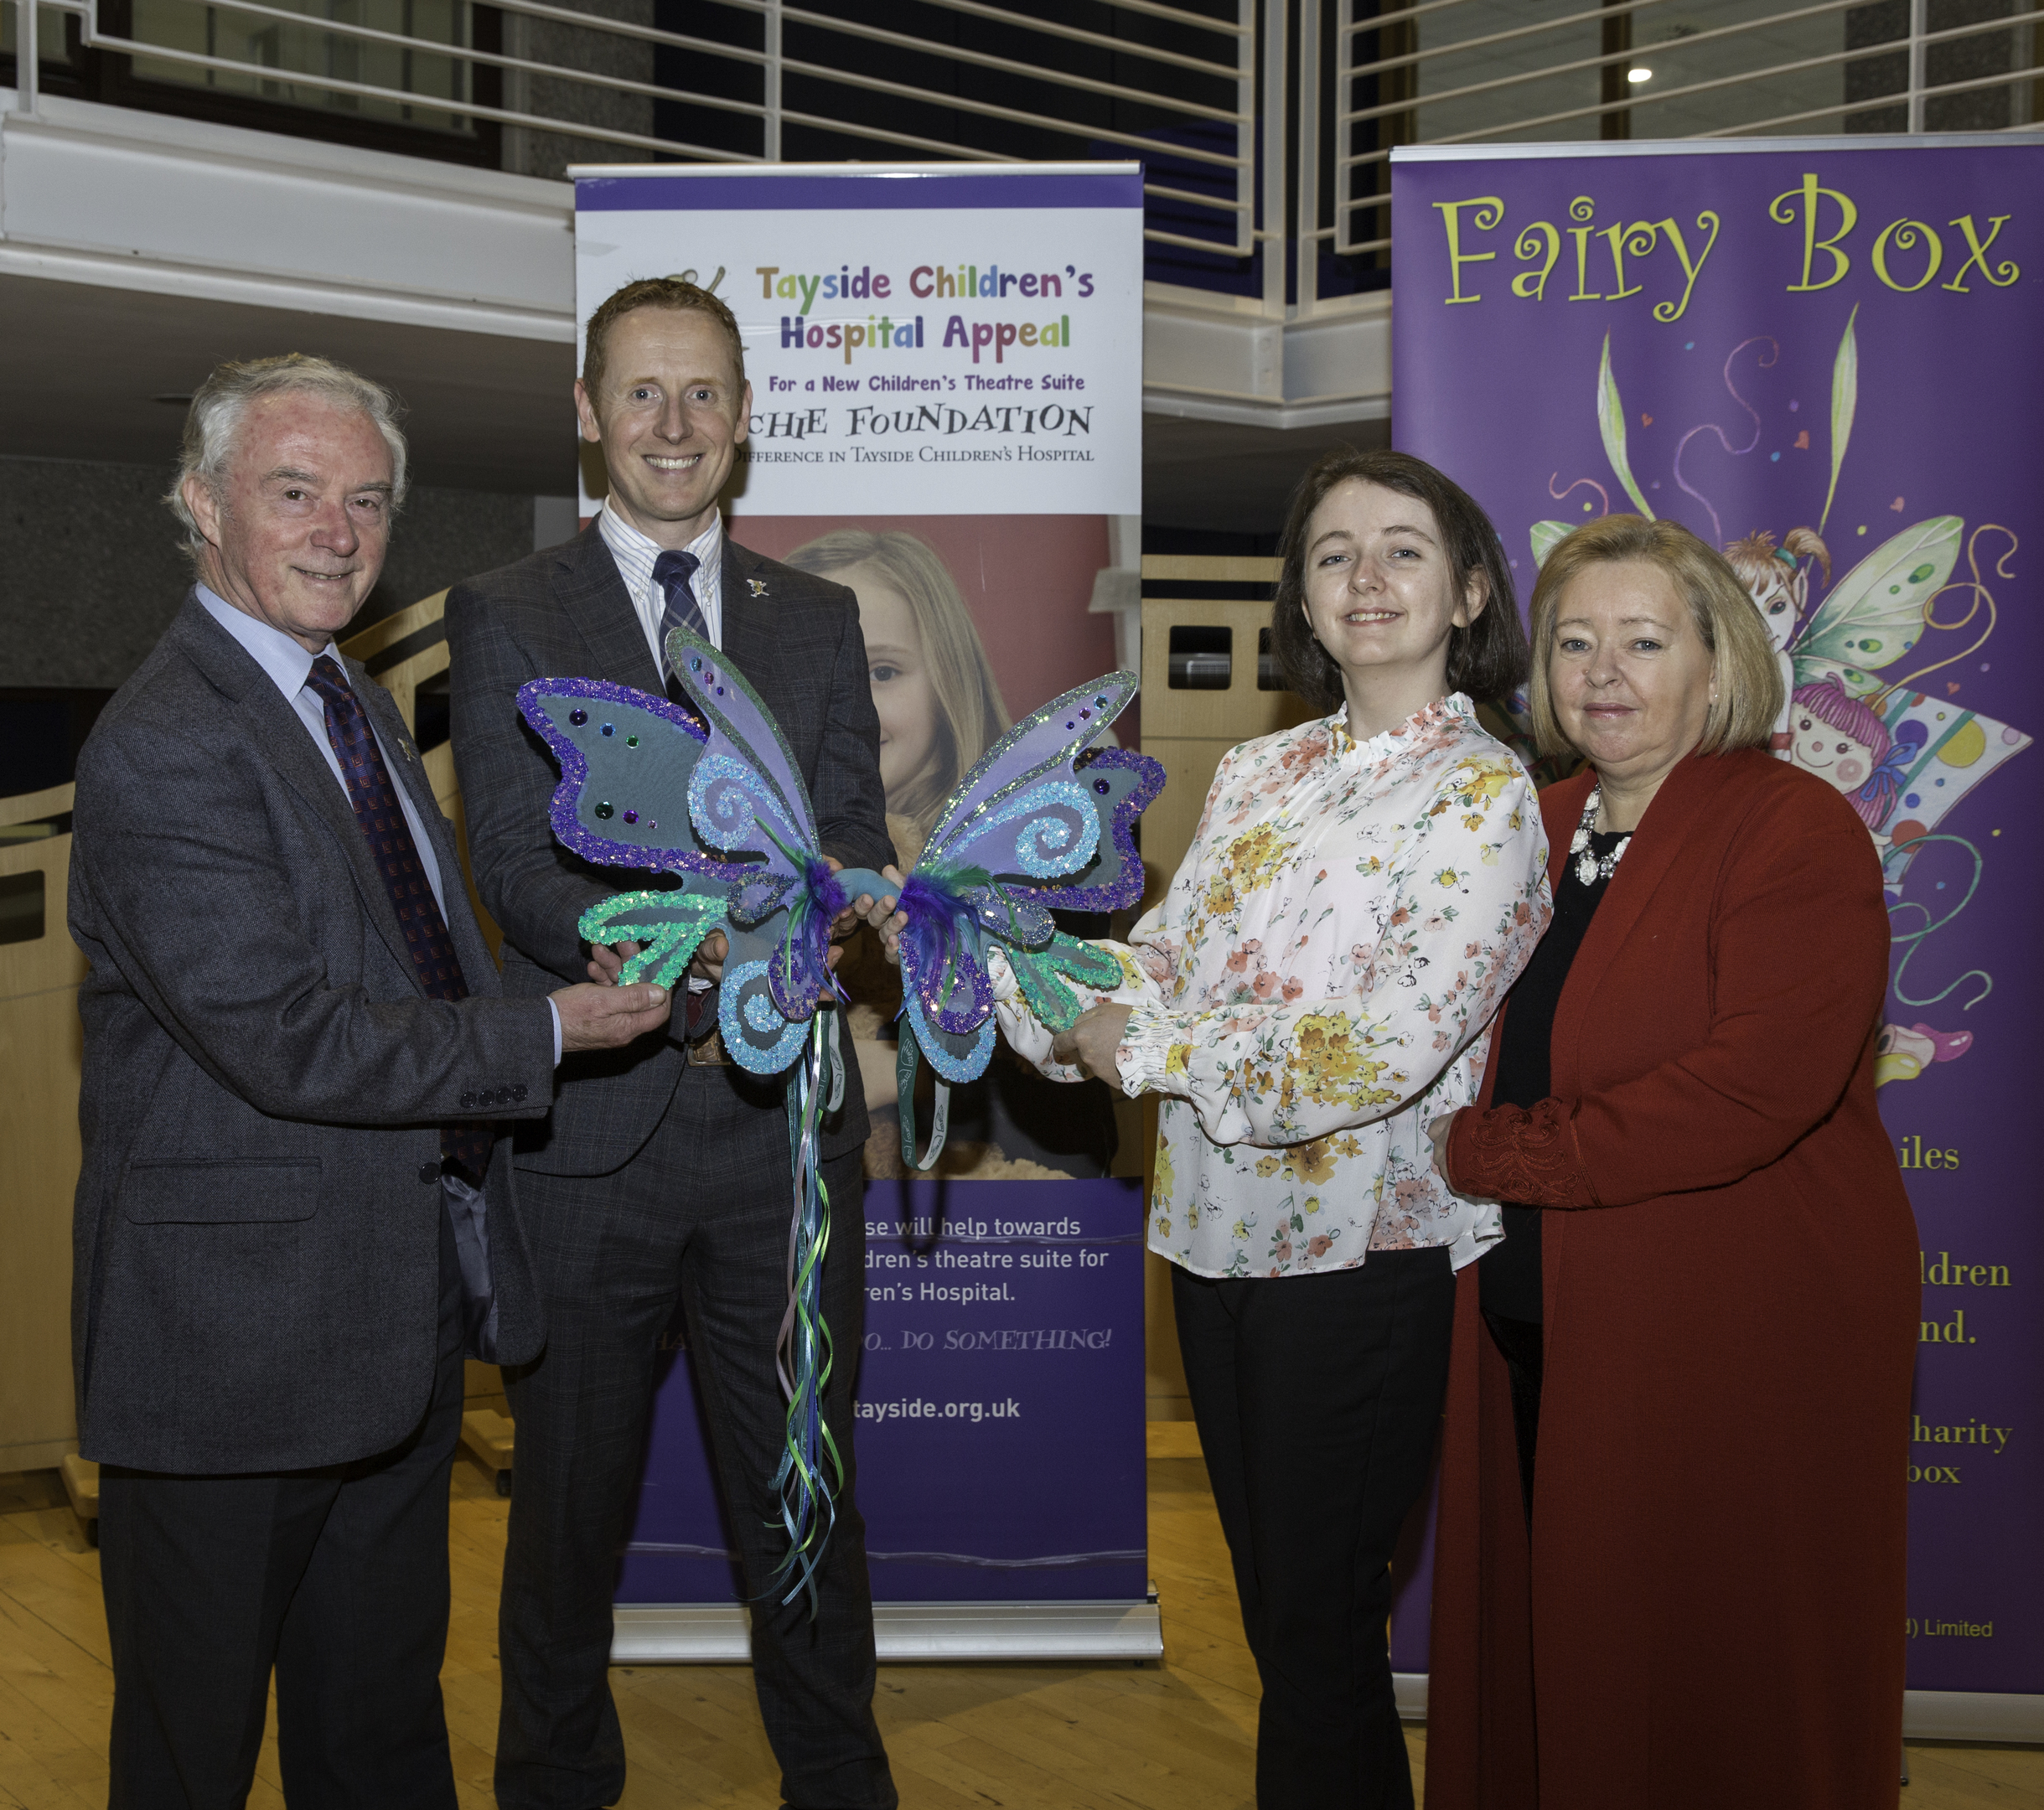 (L-R Joe Mackie, Chairman and David Cunningham, Chief Executive of The ARCHIE Foundation accept the Fairy wings from Aimee and Rosemary Butler)